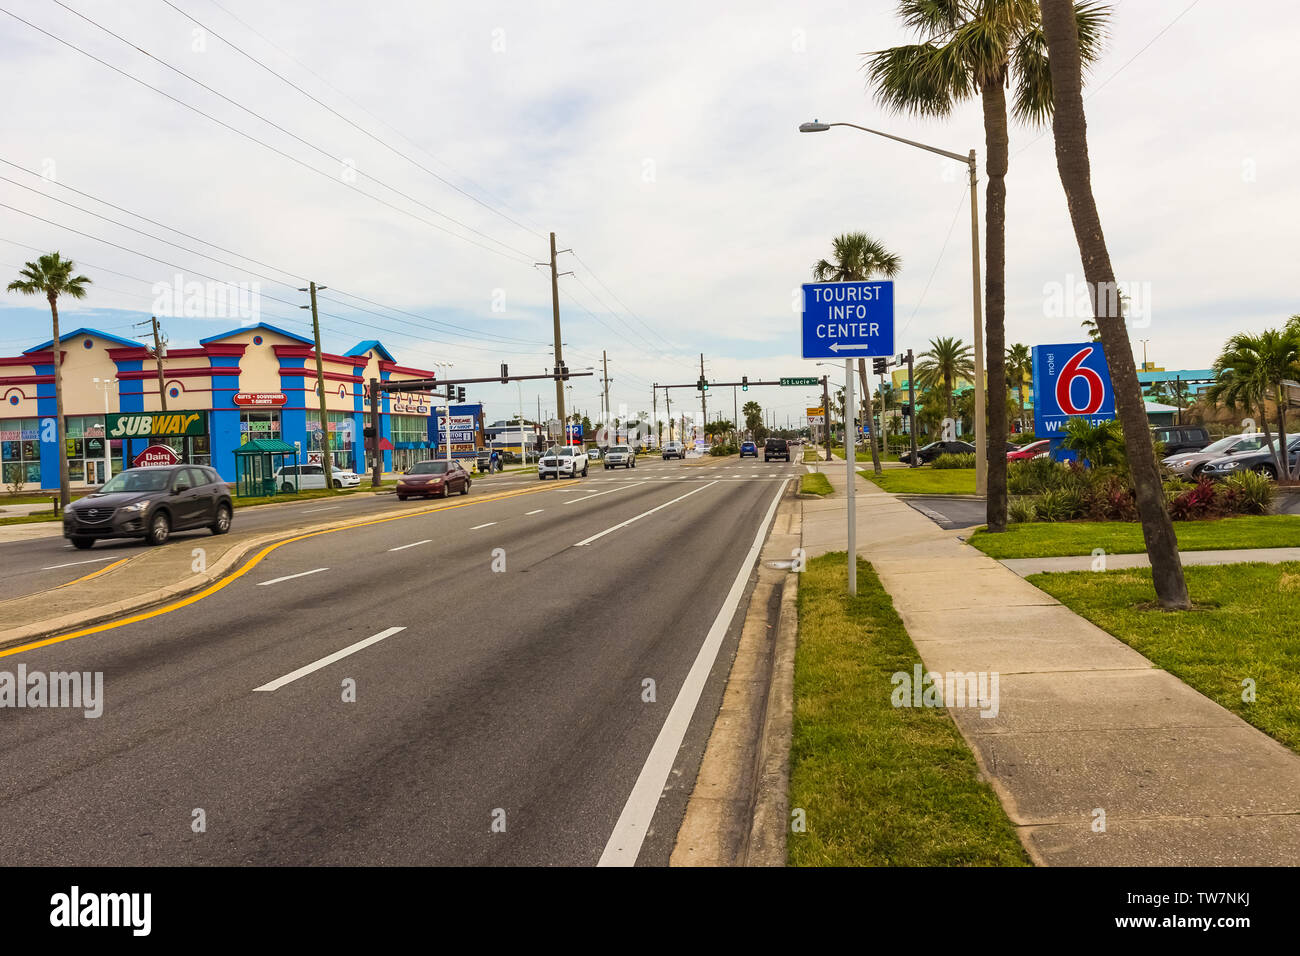 Cocoa beach, Florida, USA - April 29, 2018: The central road with shops, restaurants and hotels Stock Photo